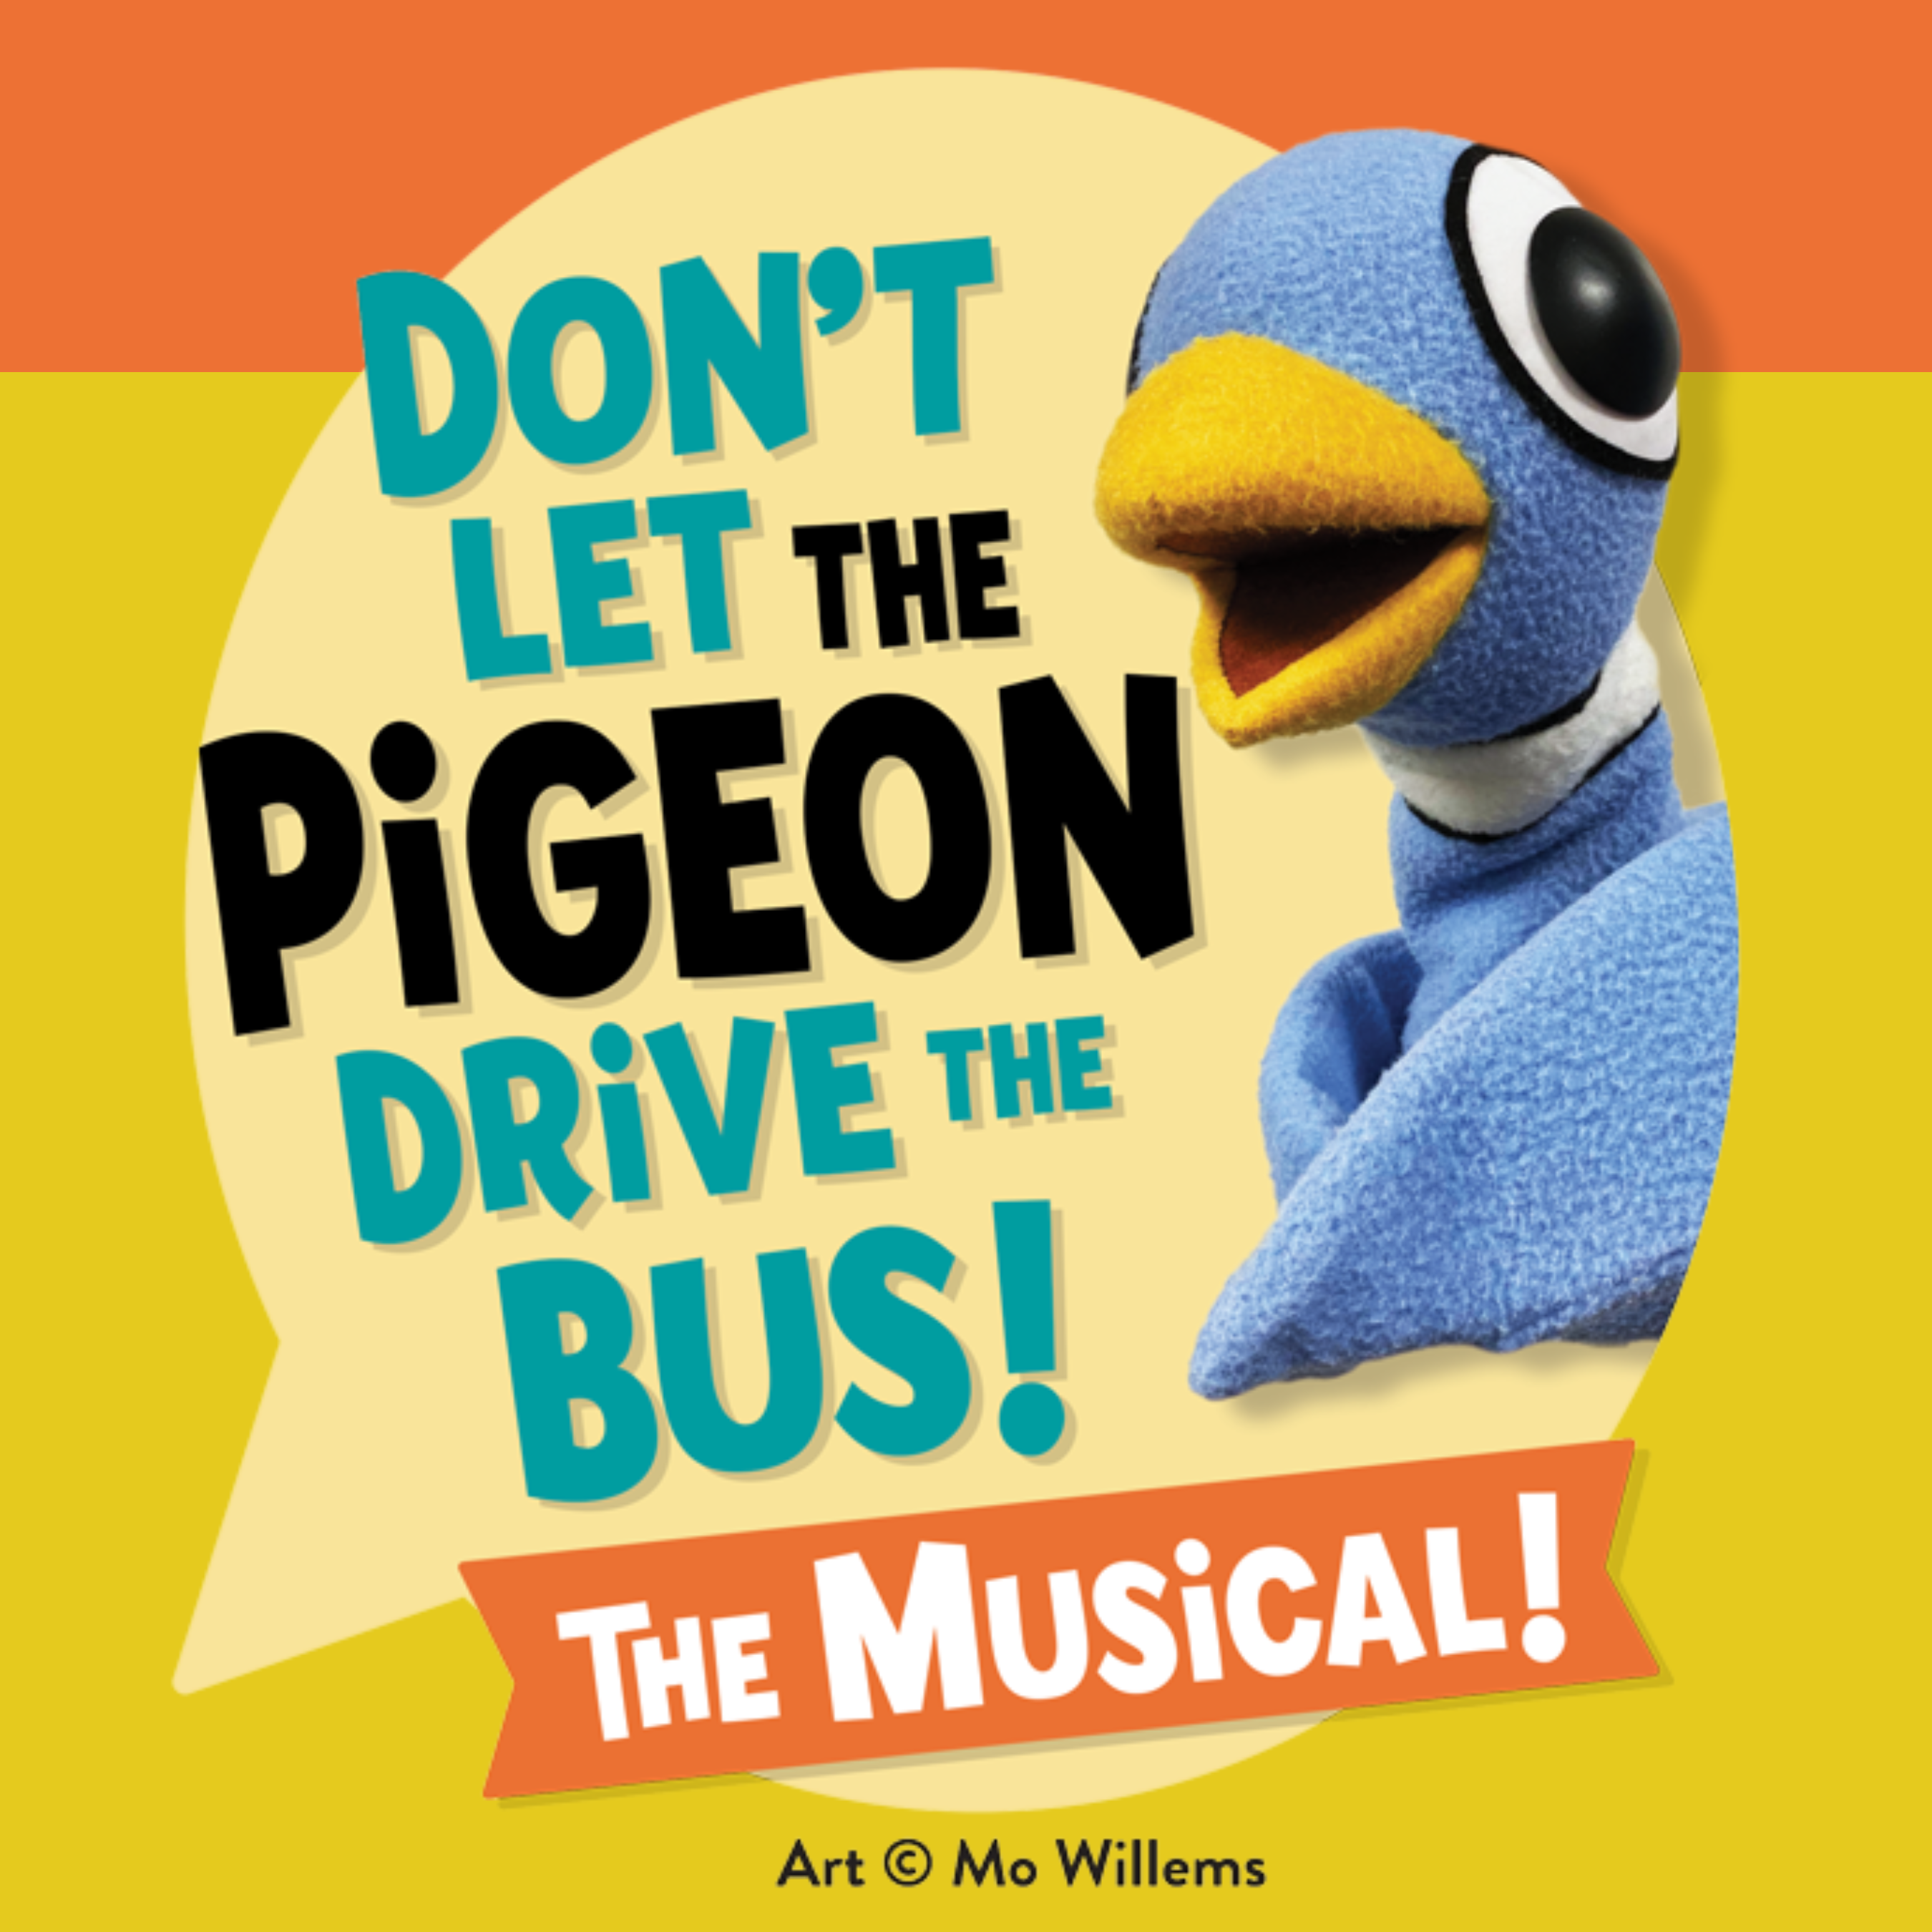 Don’t Let The Pigeon Drive The Bus! The Musical!